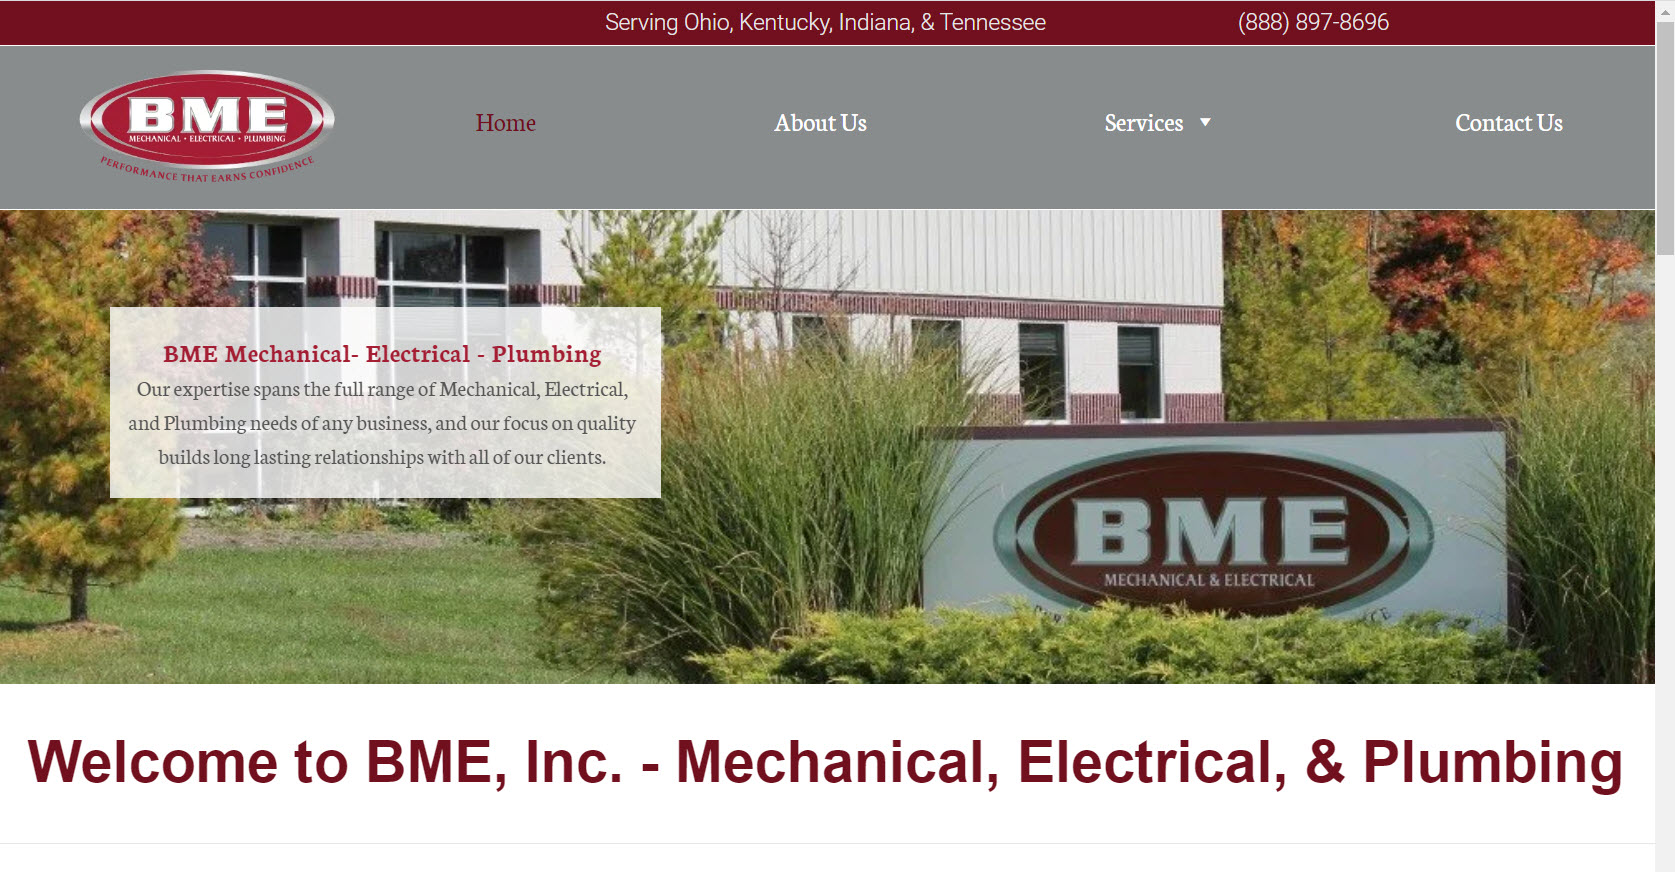 BME - Midwest's leading specialized mechanical contractor, provides mechanical, electrical, HVAC and plumbing services for commercial and industrial partners servicing all of Ohio, Indiana, Kentucky and Tennessee.  Call 888.897.8696 Anytime!